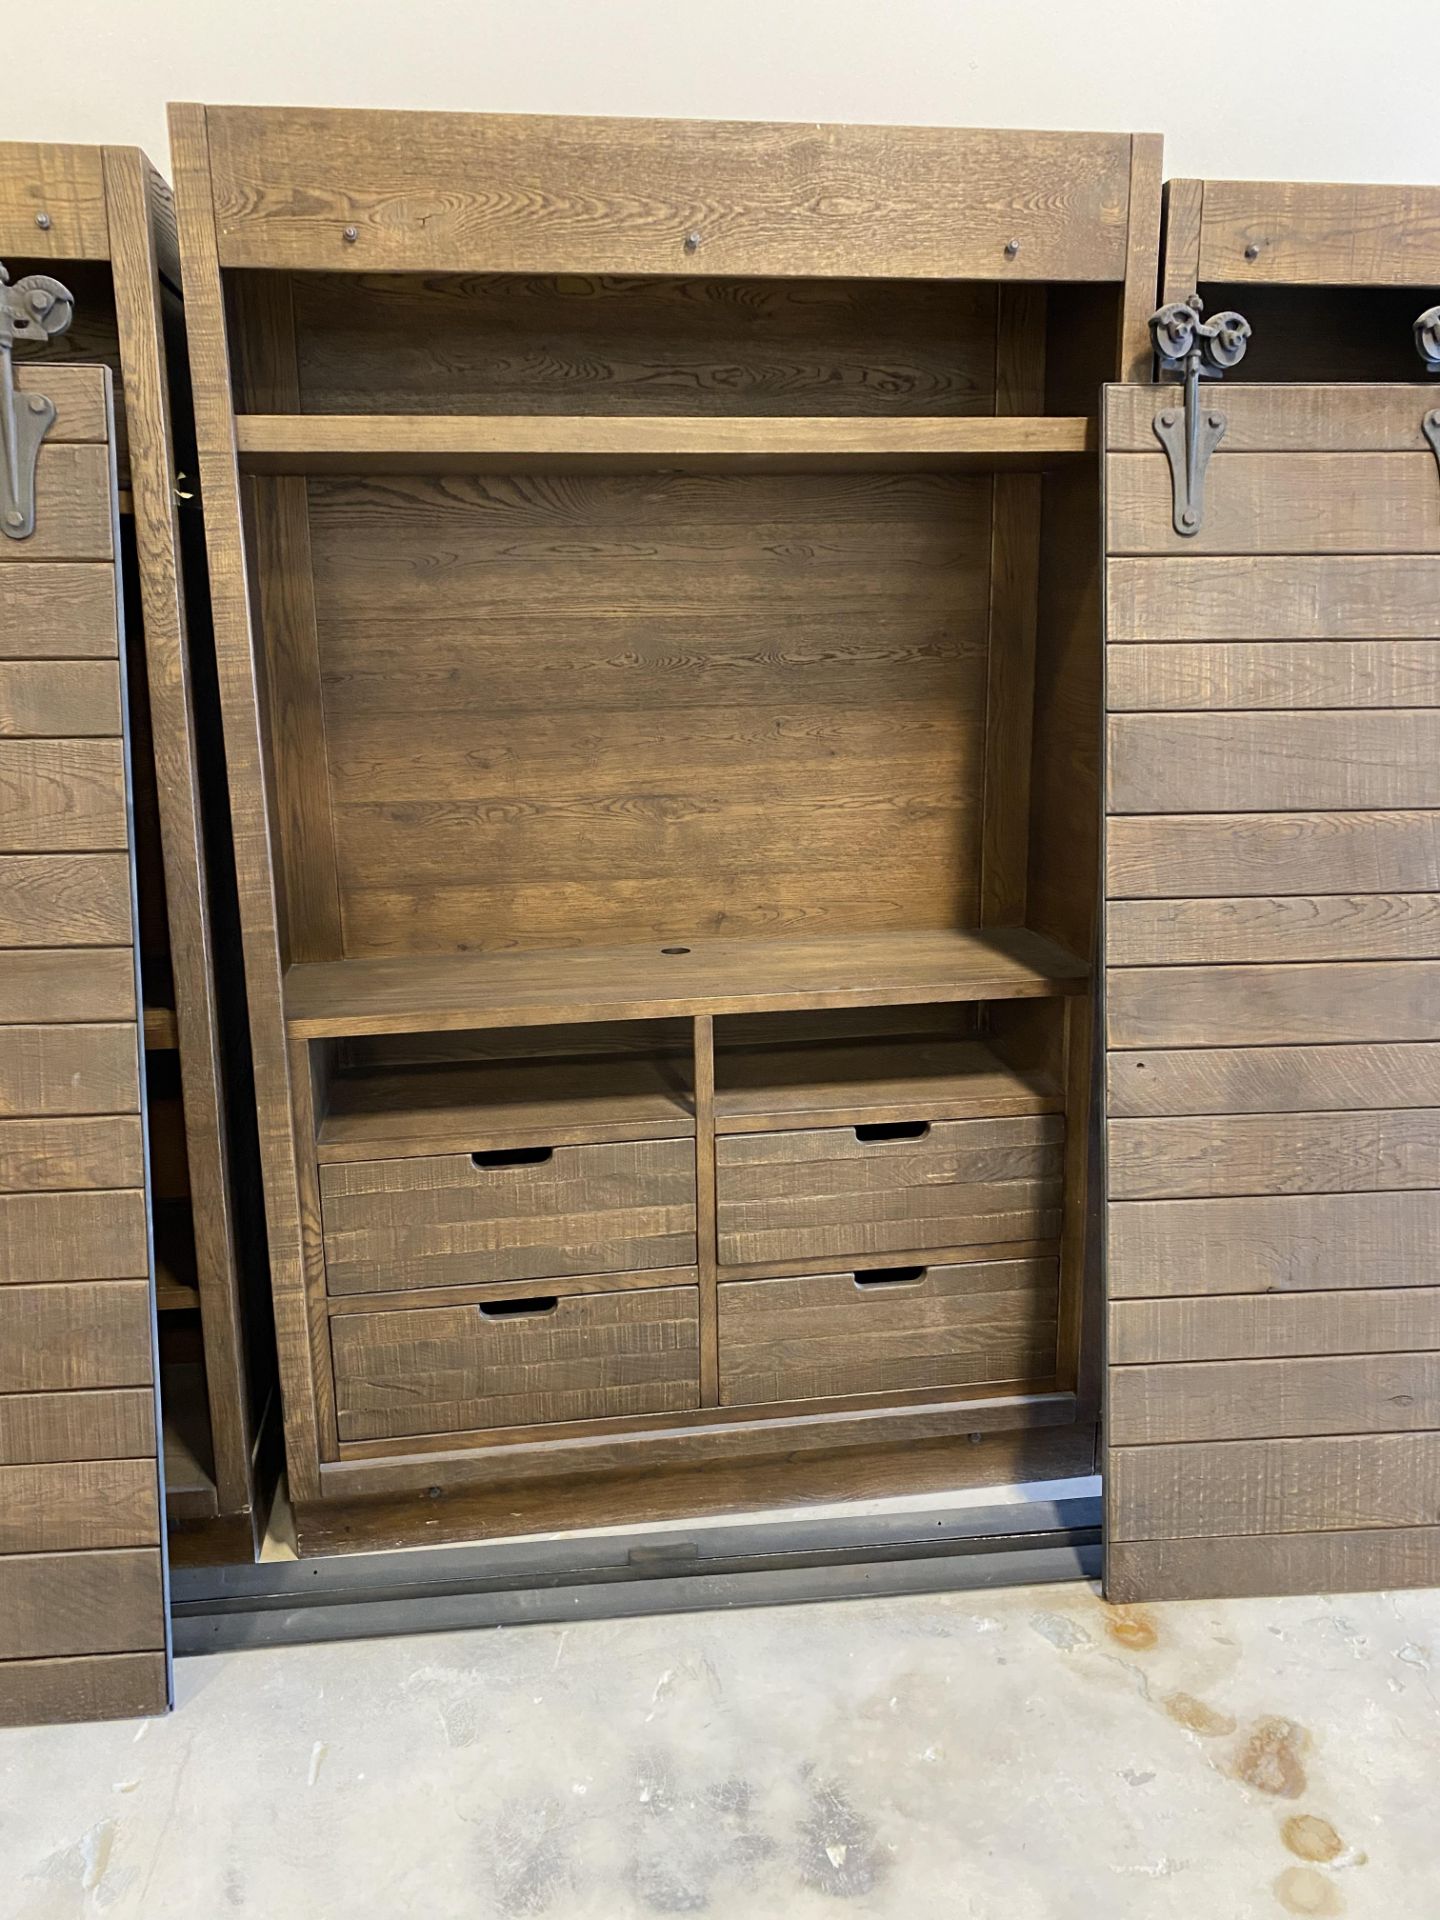 BEAUTIFUL LARGE ENTERTAINMENT UNIT $6000 VALUE WITH BARN STYLE DOORS - Image 5 of 8